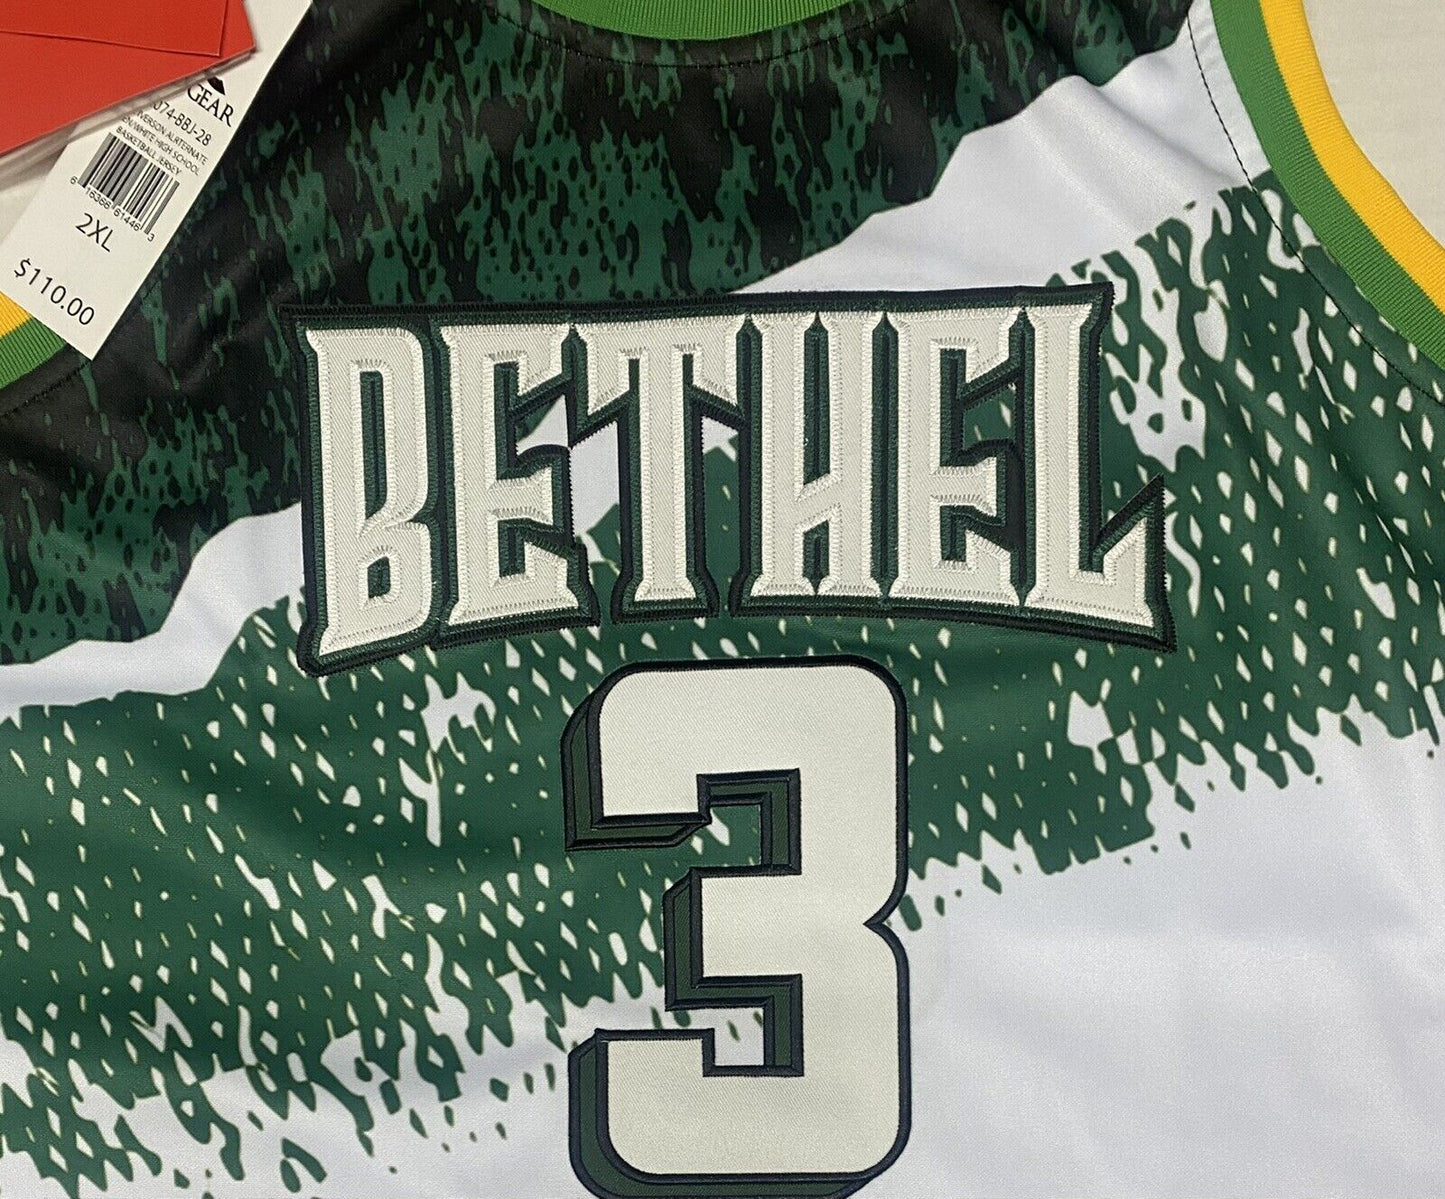 NEW AUTHENTIC Allen Iverson #3 Bethel HighSchool Throwback Basketball Jersey M